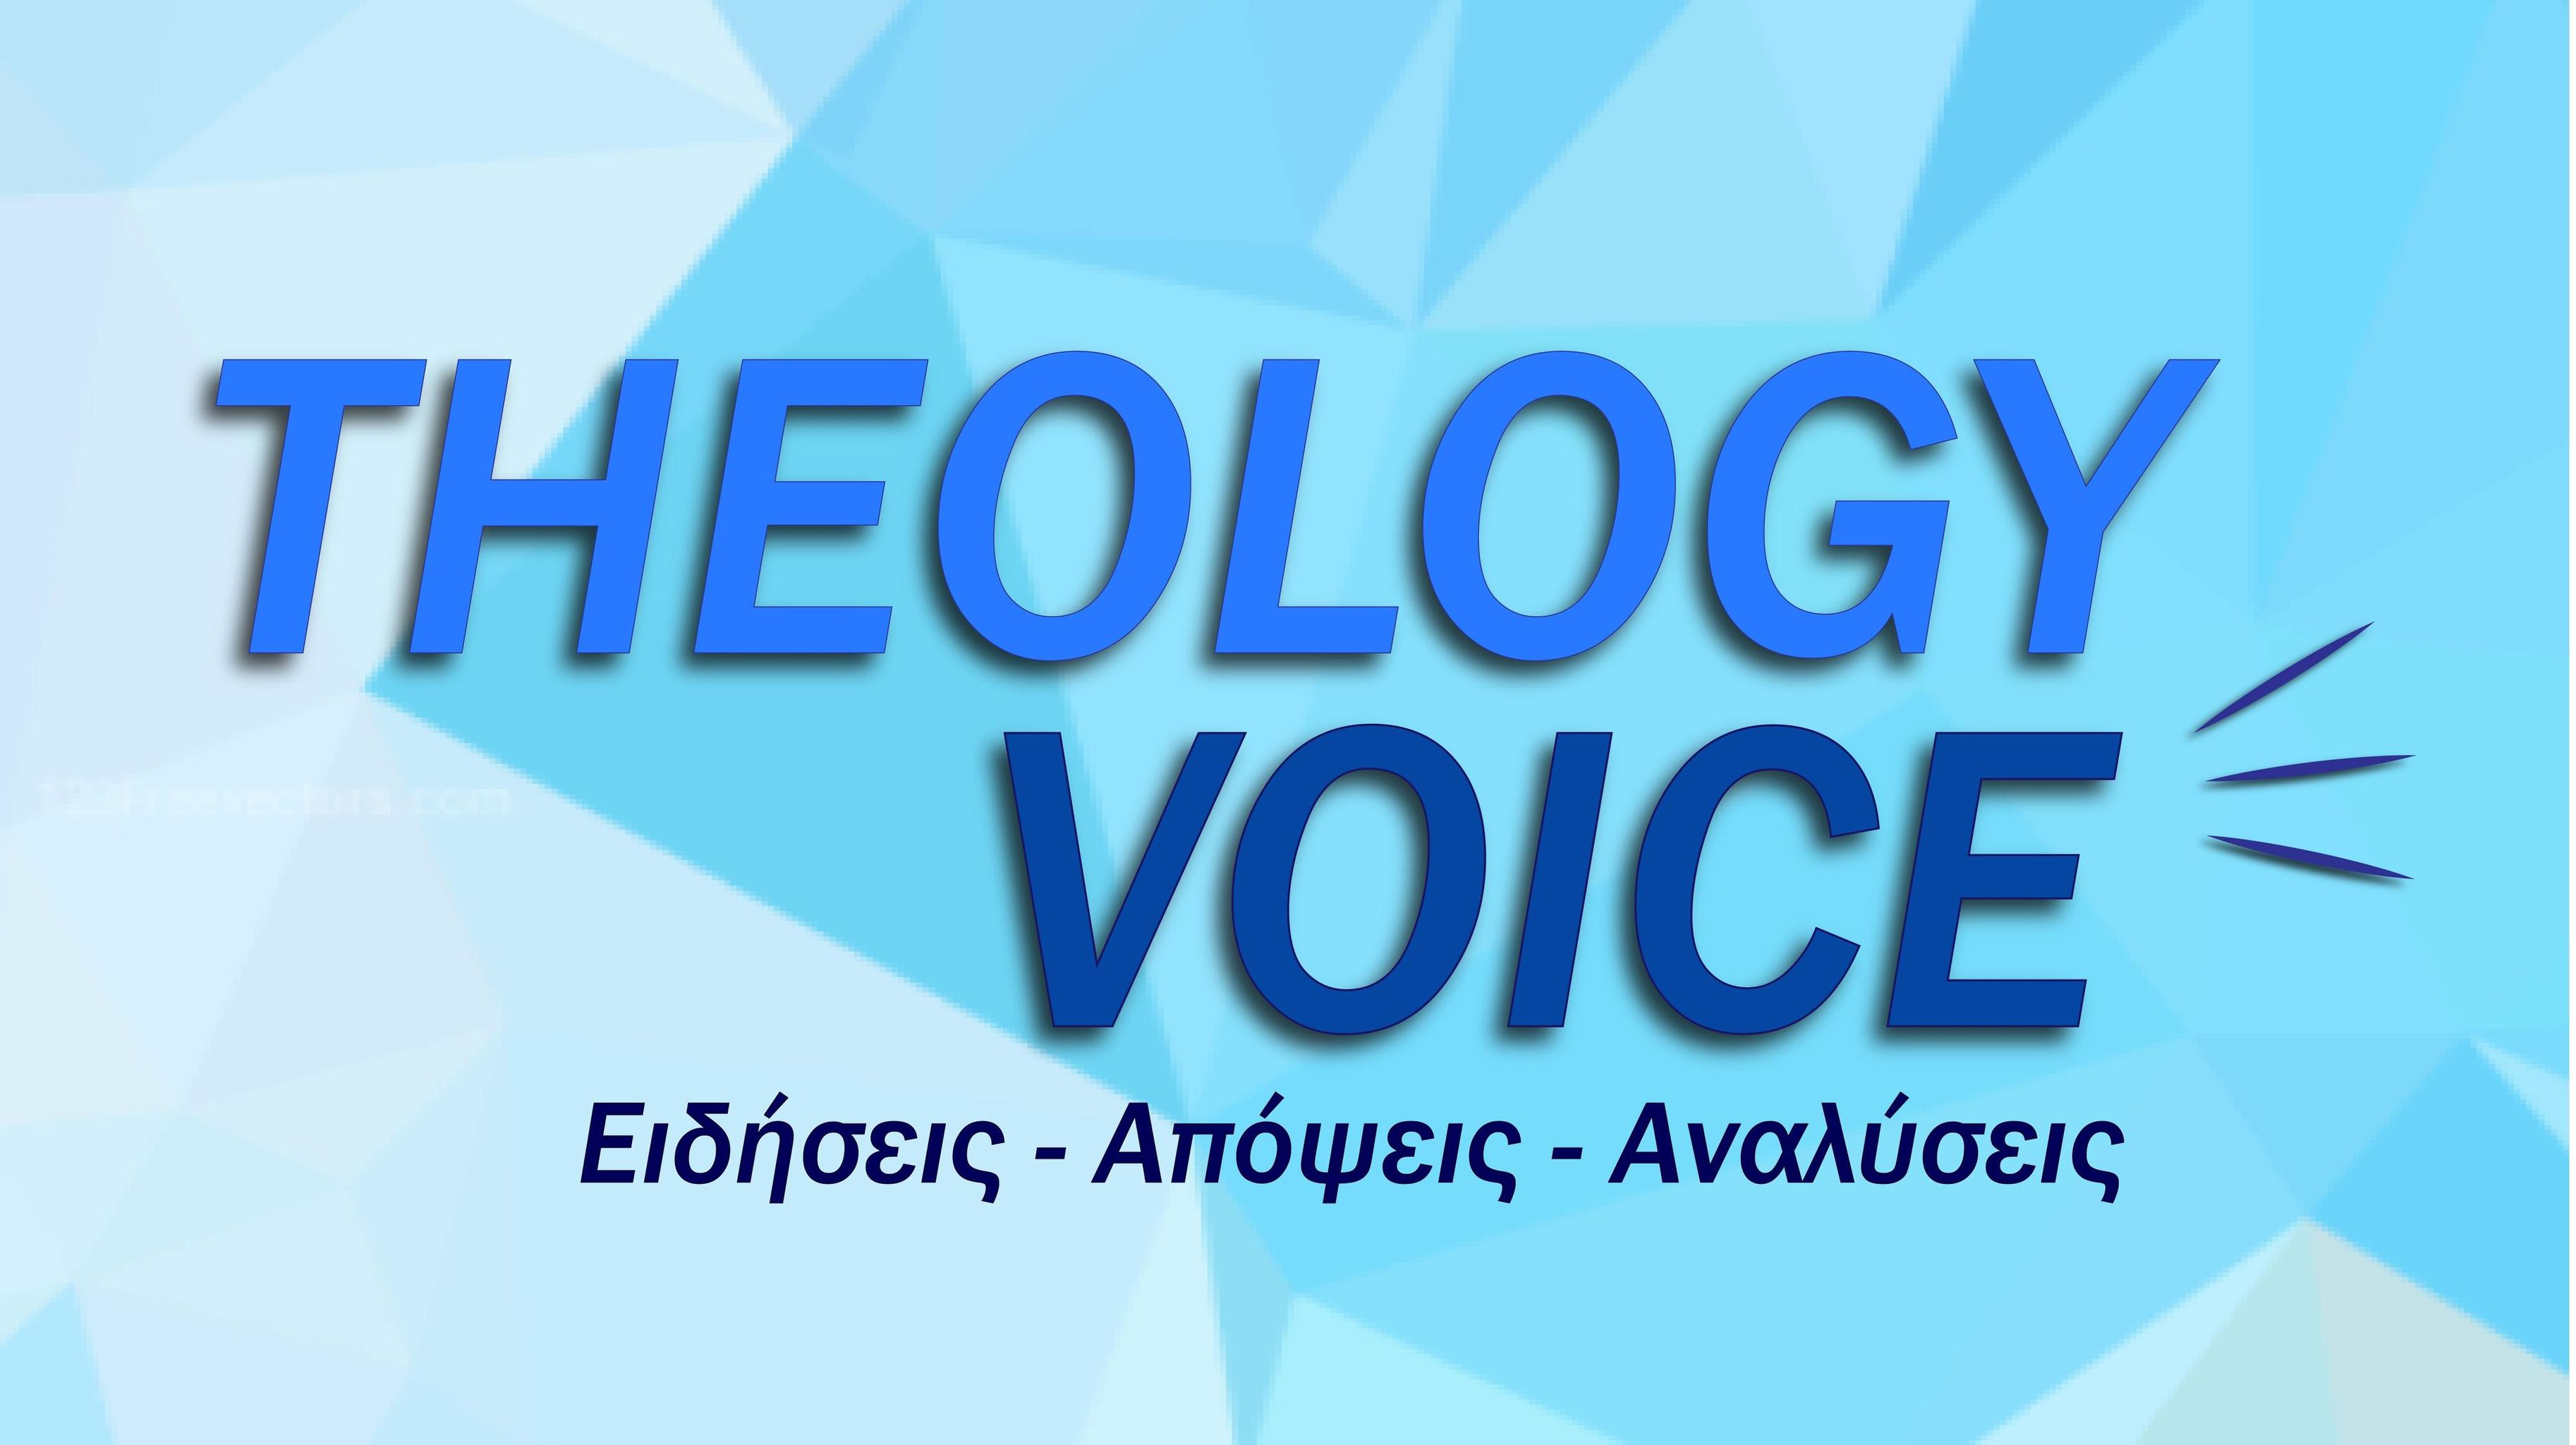 THEOLOGY VOICE